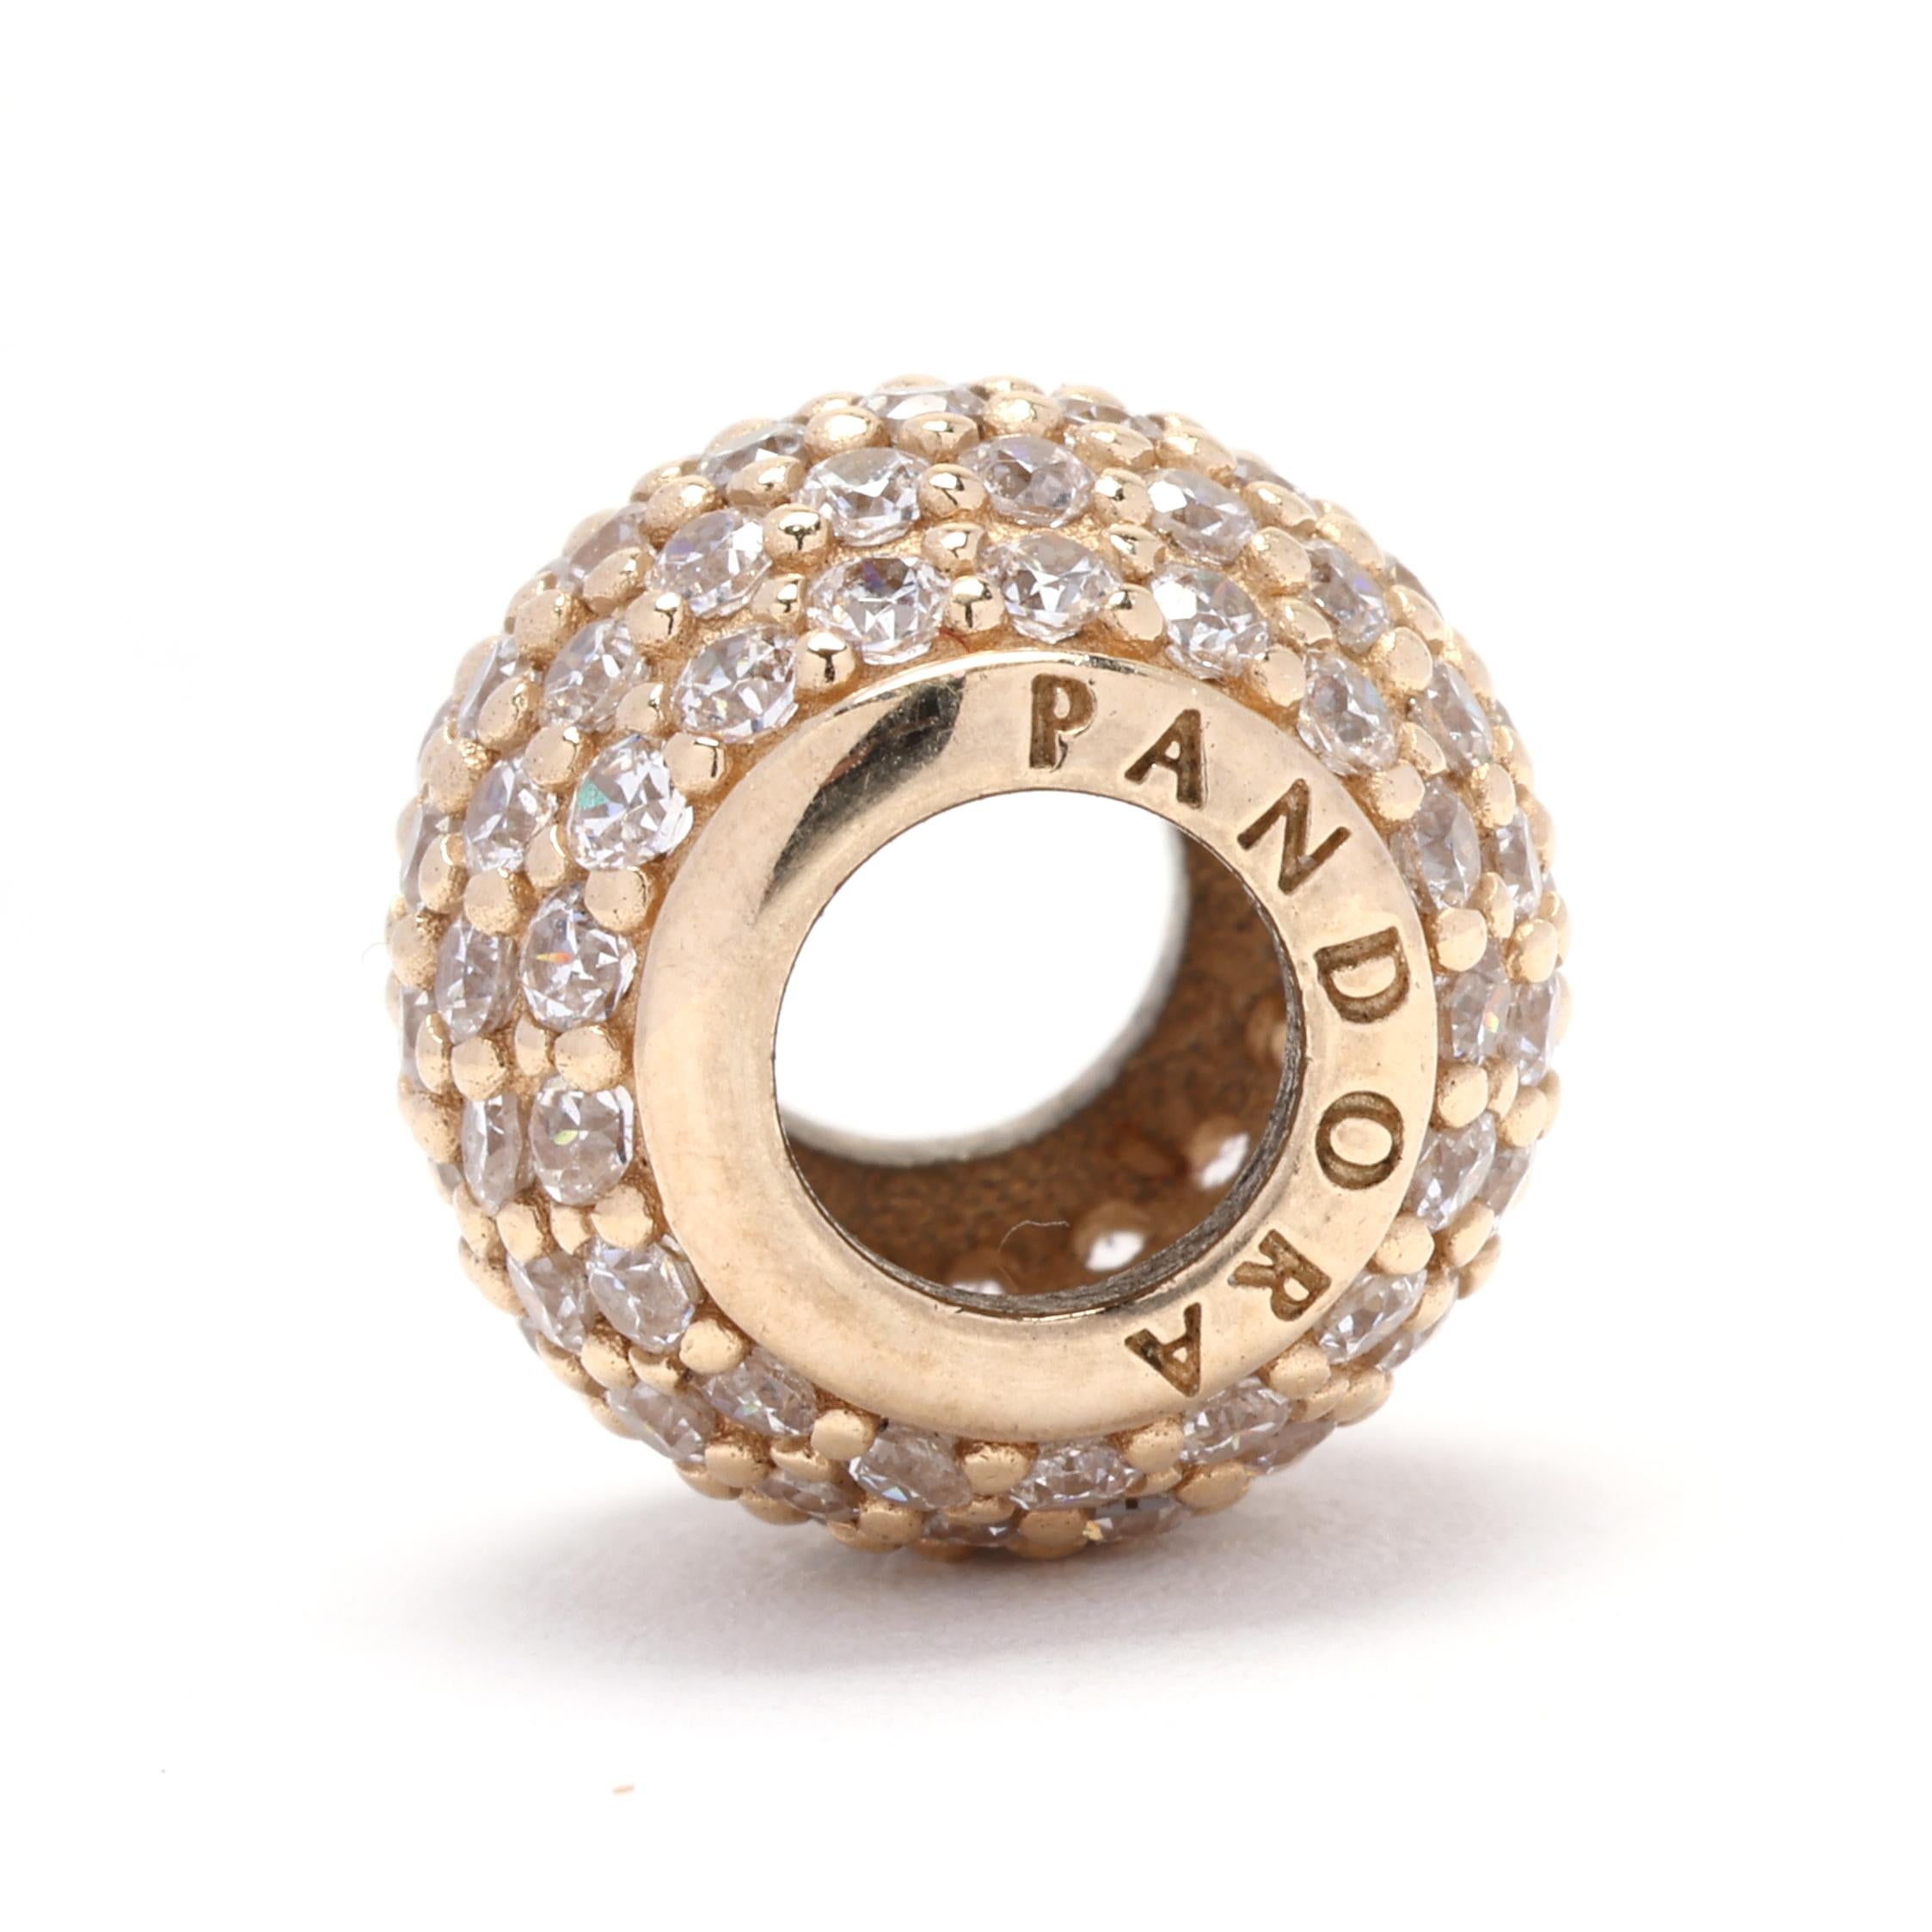 This stunning Pandora CZ Gold Charm is made of high-quality 14K yellow gold. It features a ball design with dazzling cubic zirconia stones for added sparkle and elegance. This charm is a perfect addition to any Pandora bracelet or necklace, and can